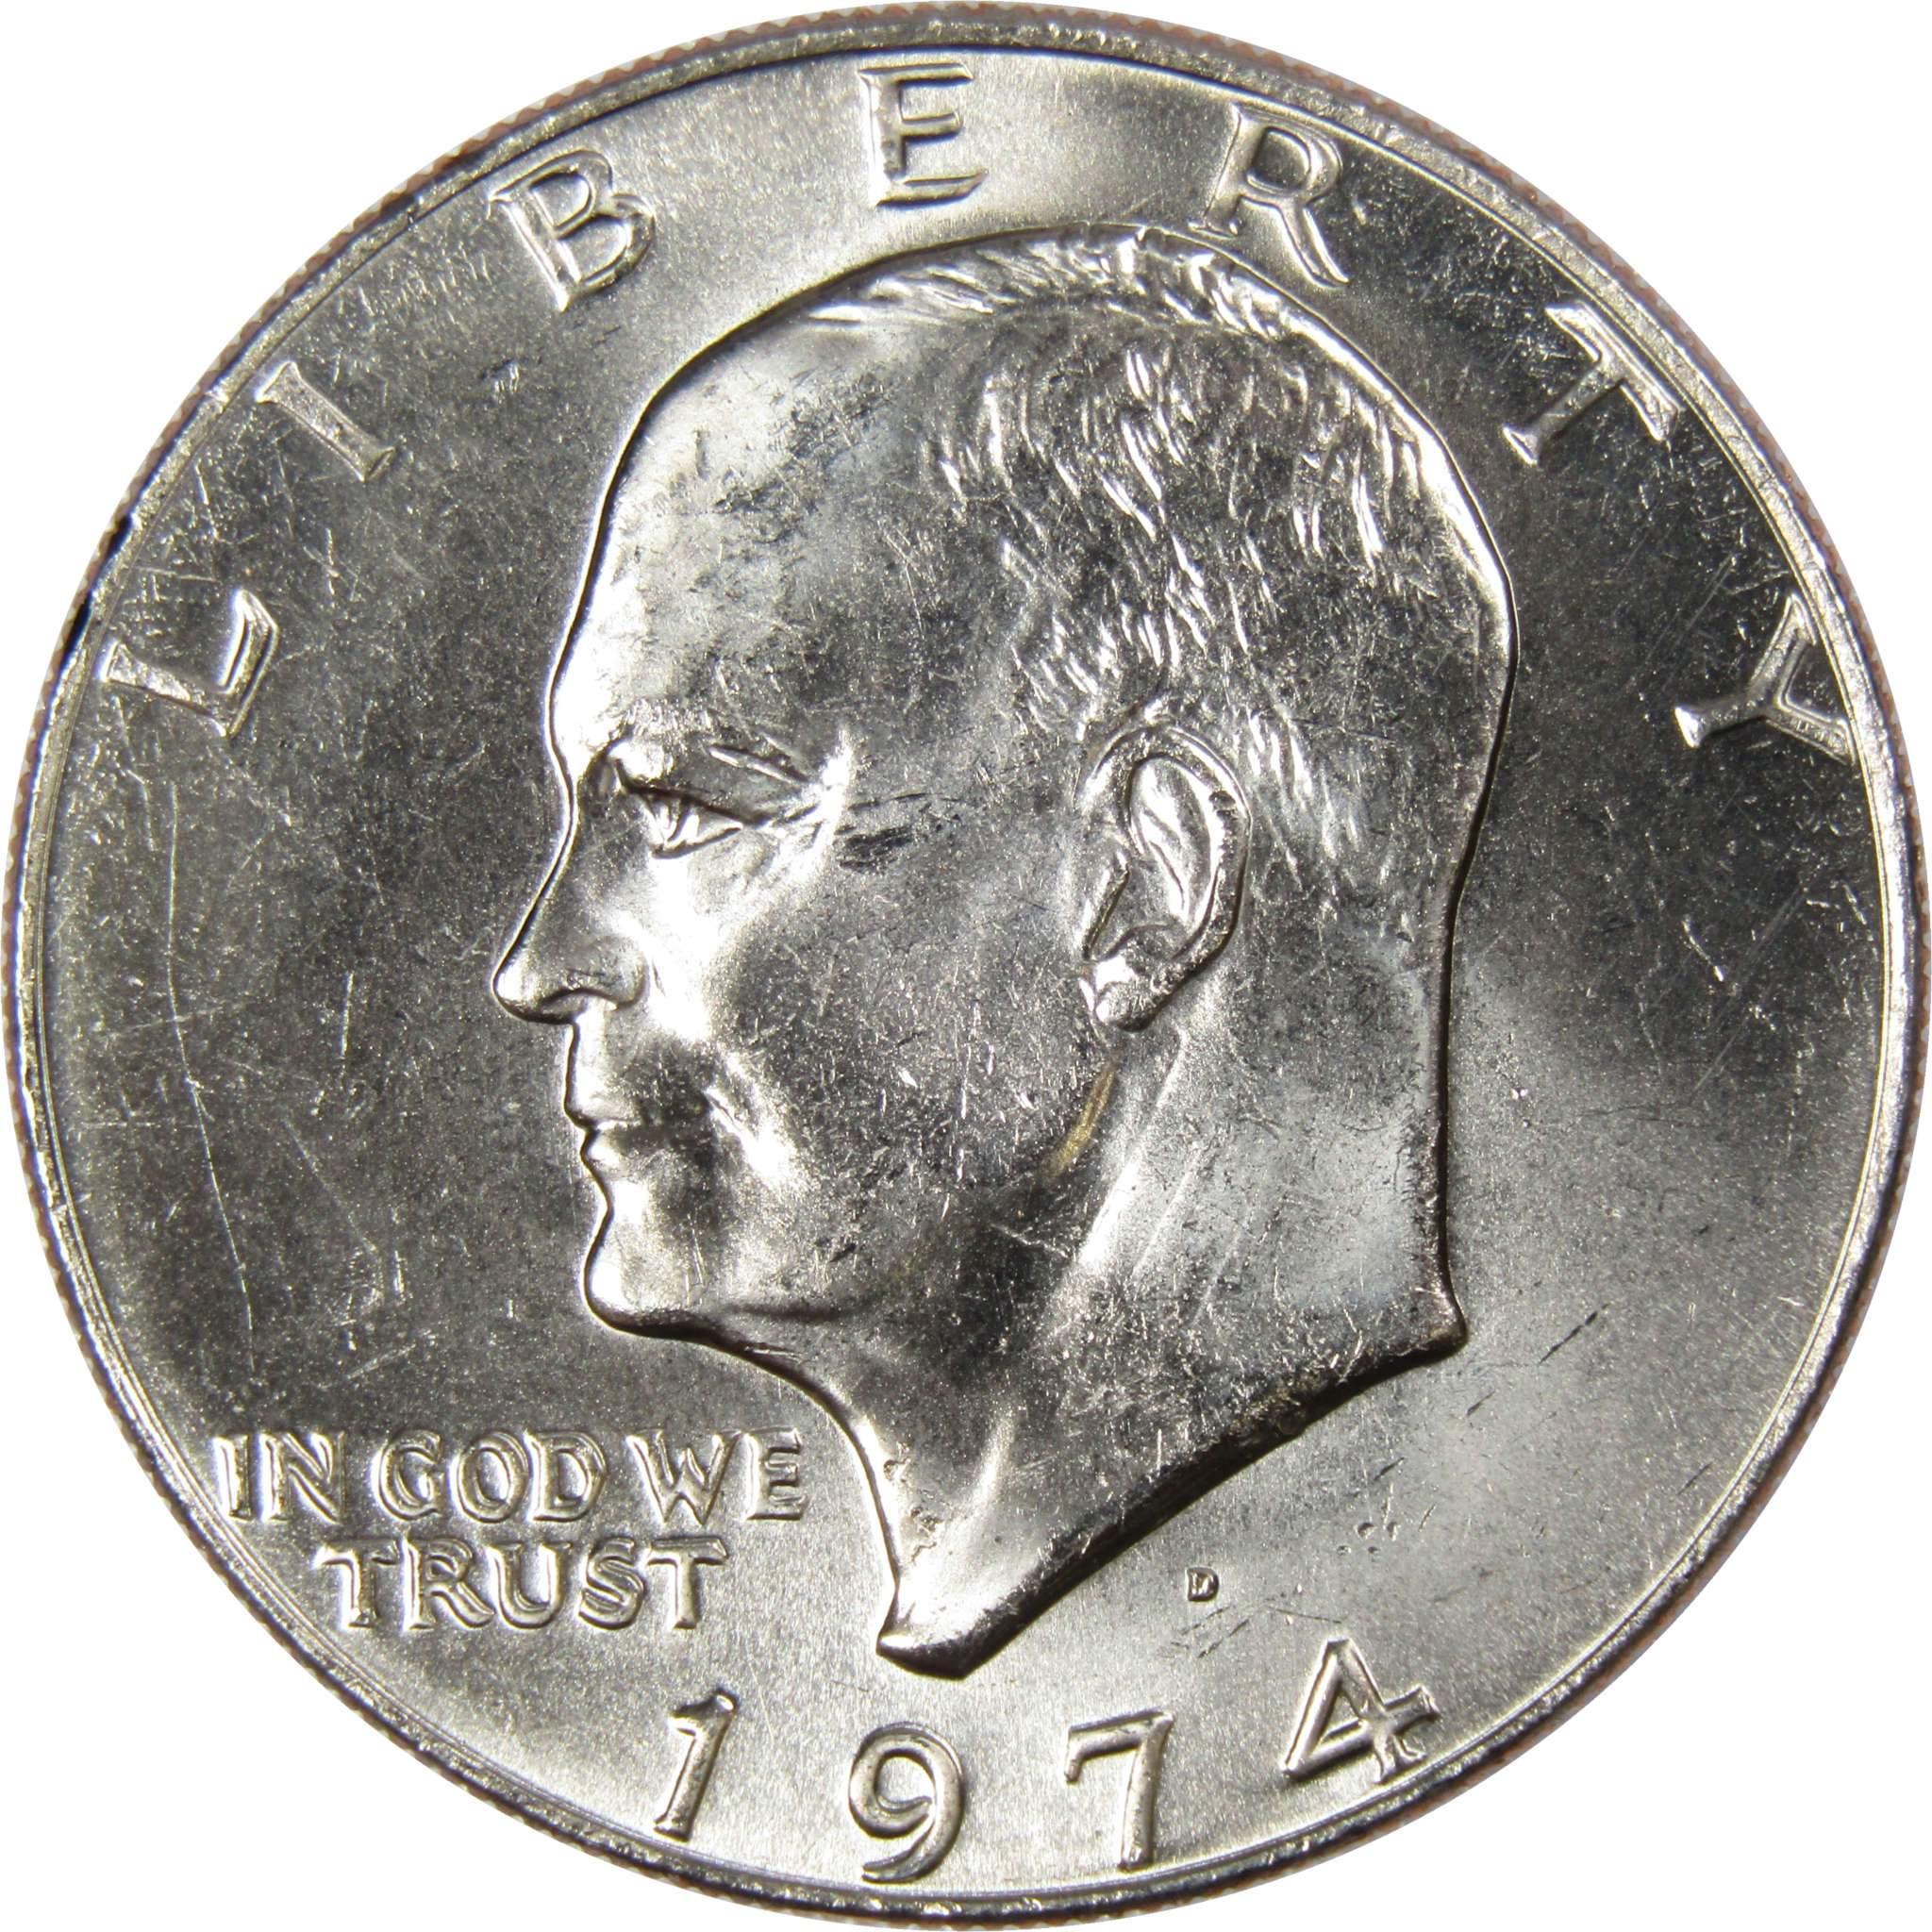 1974 D Eisenhower Dollar BU Uncirculated Mint State Clad IKE $1 US Coin